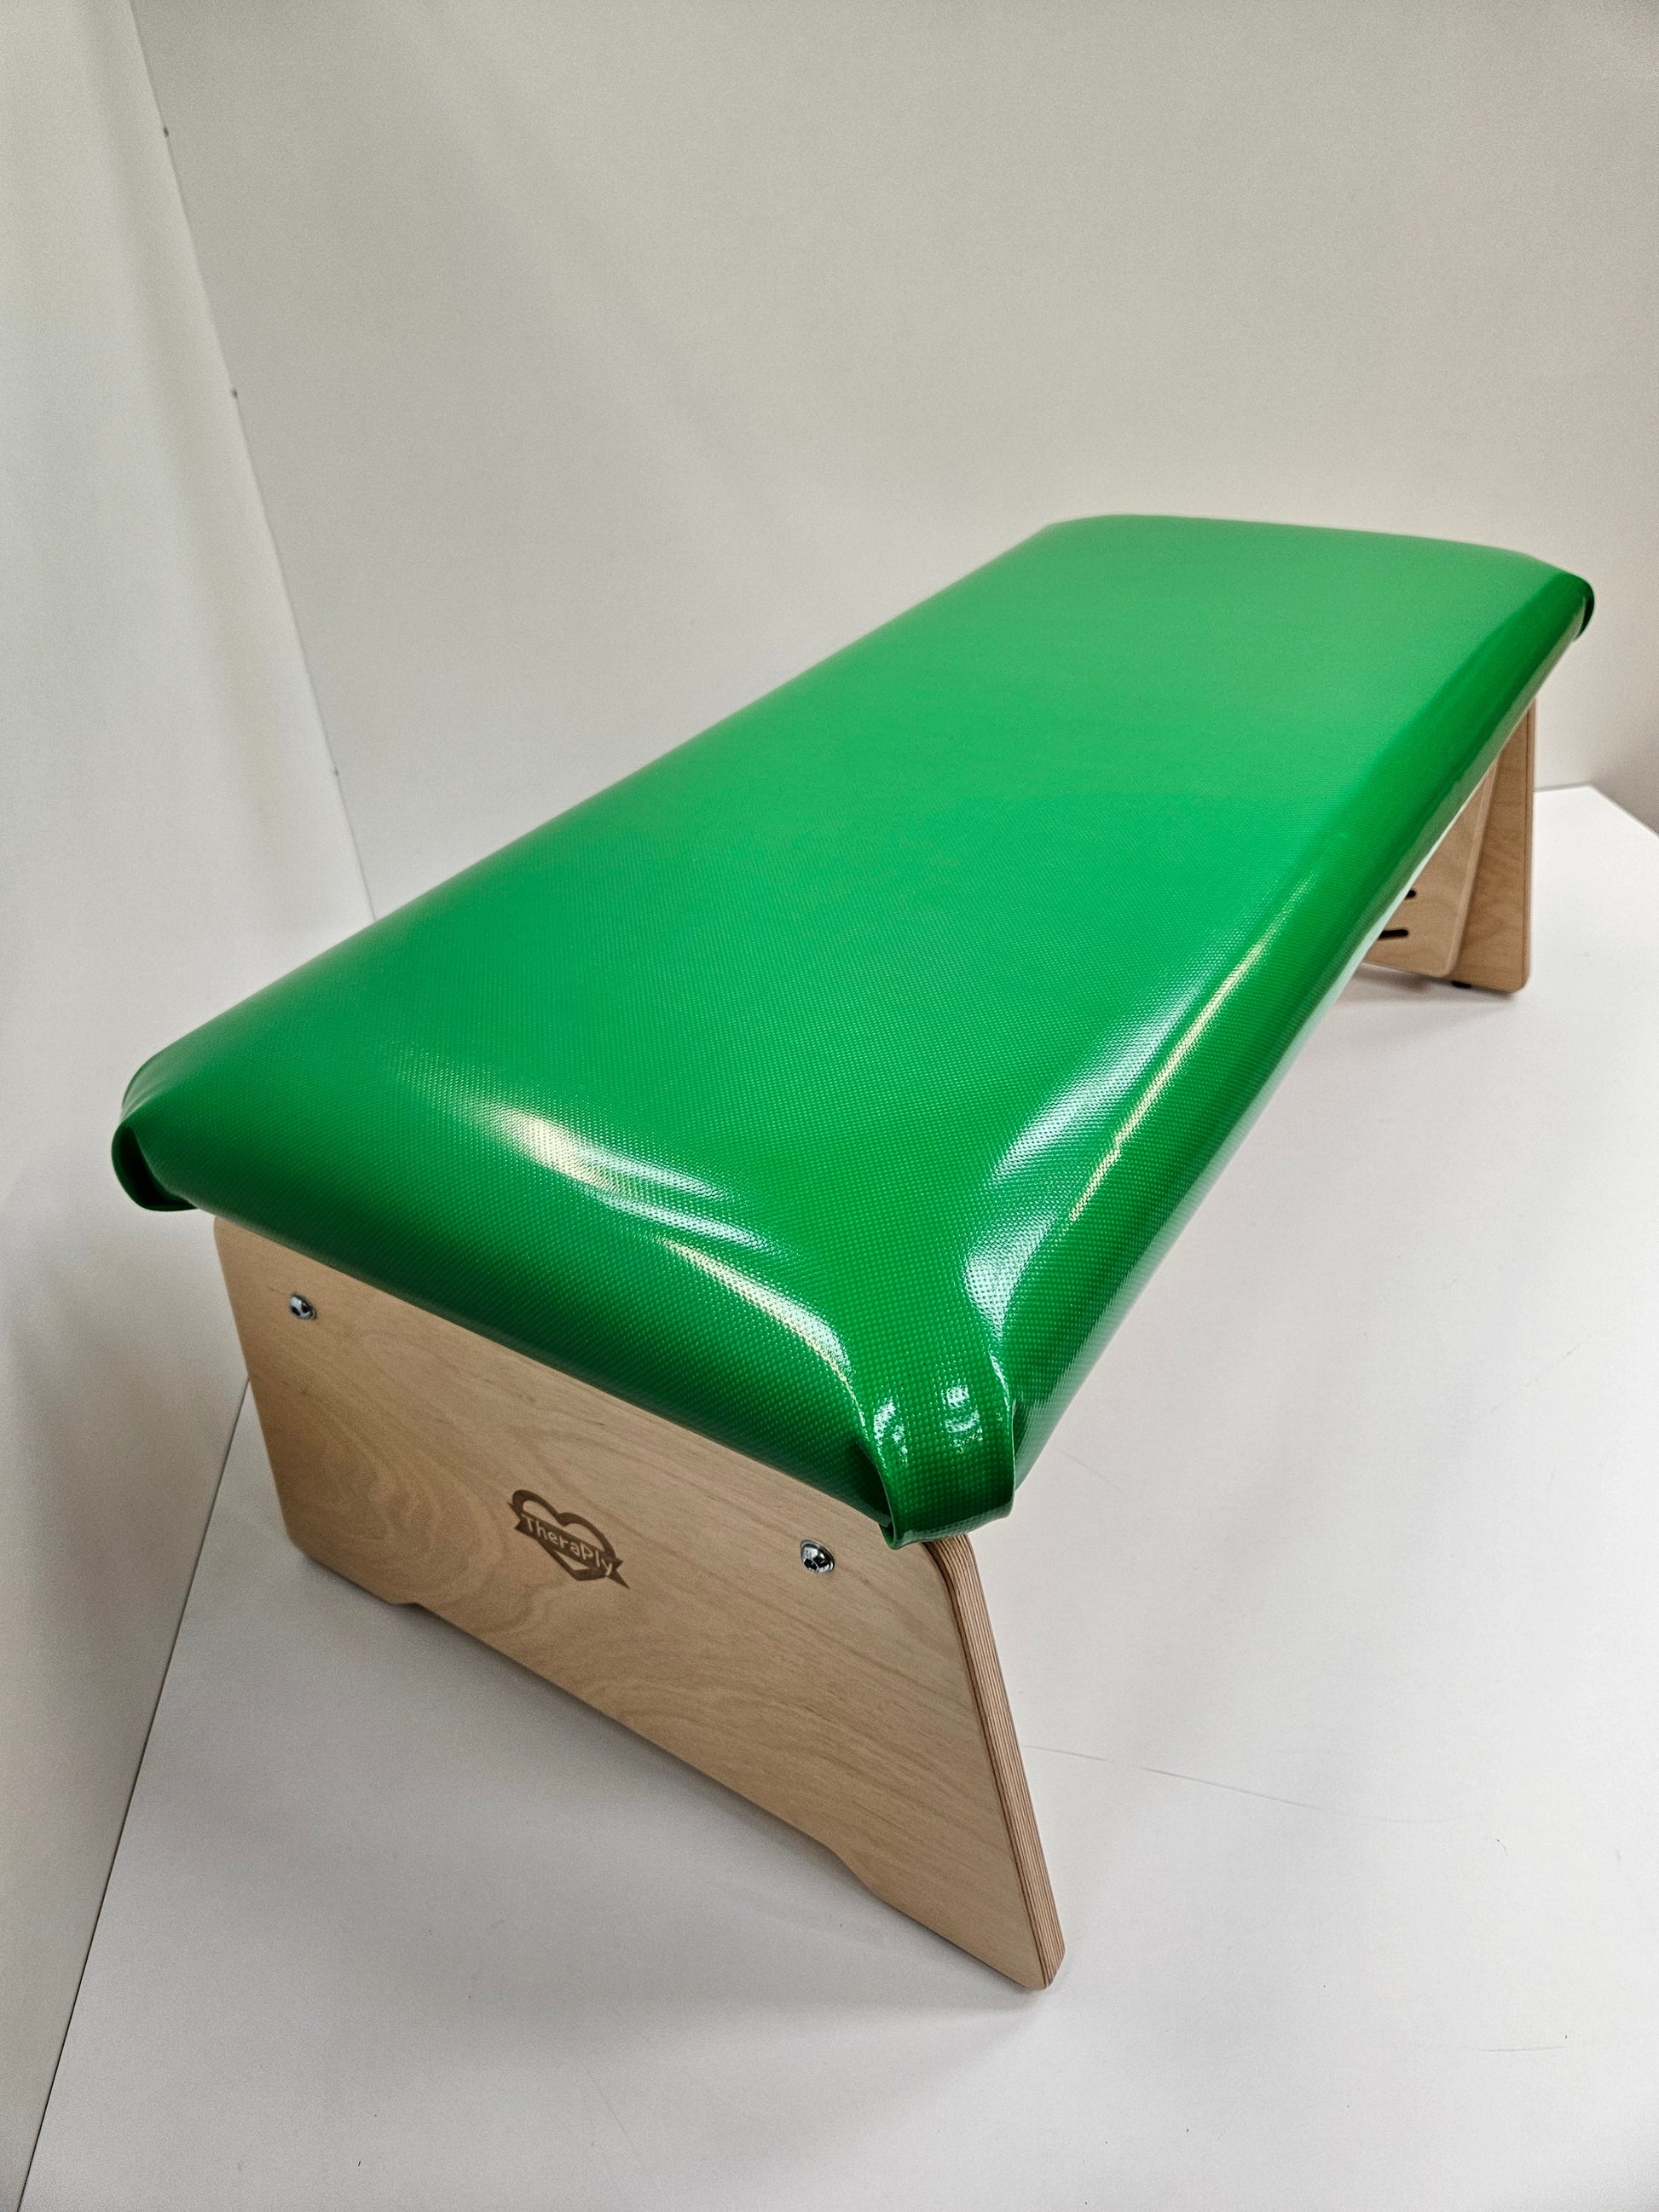 Green TheraPly therapy bench